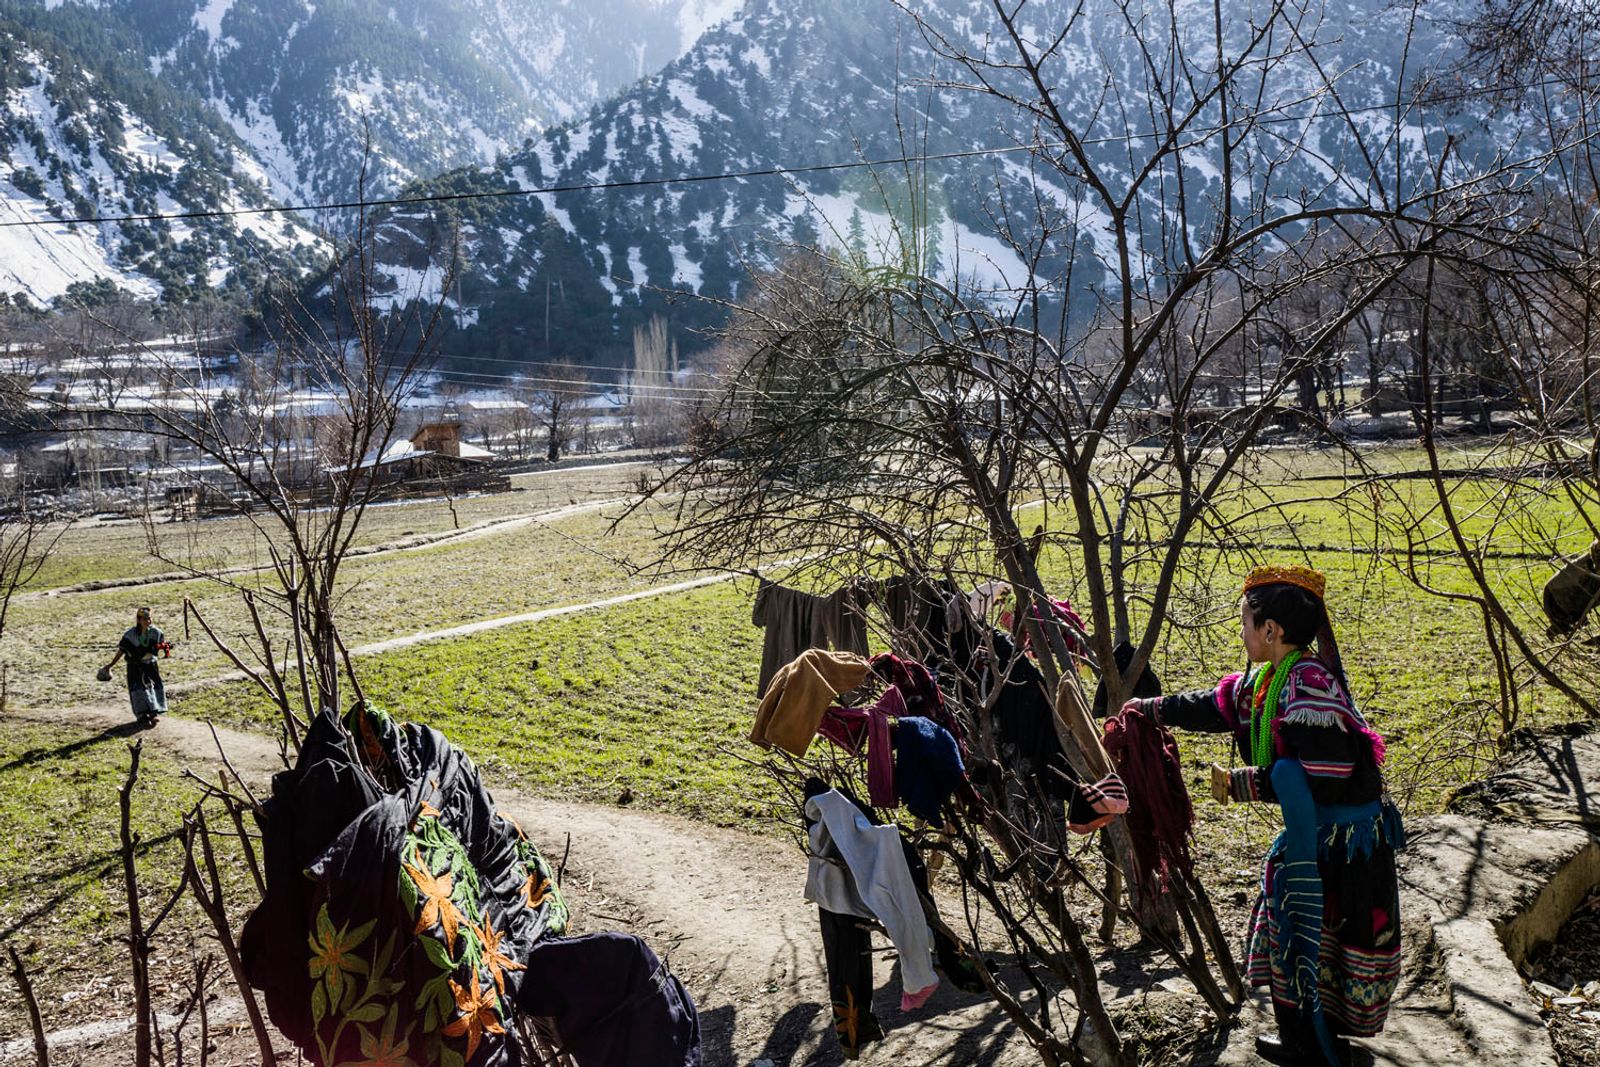 © Sarah Caron - Laundry is done in the streams running through Kalash valley only on days when the winter sun comes out.